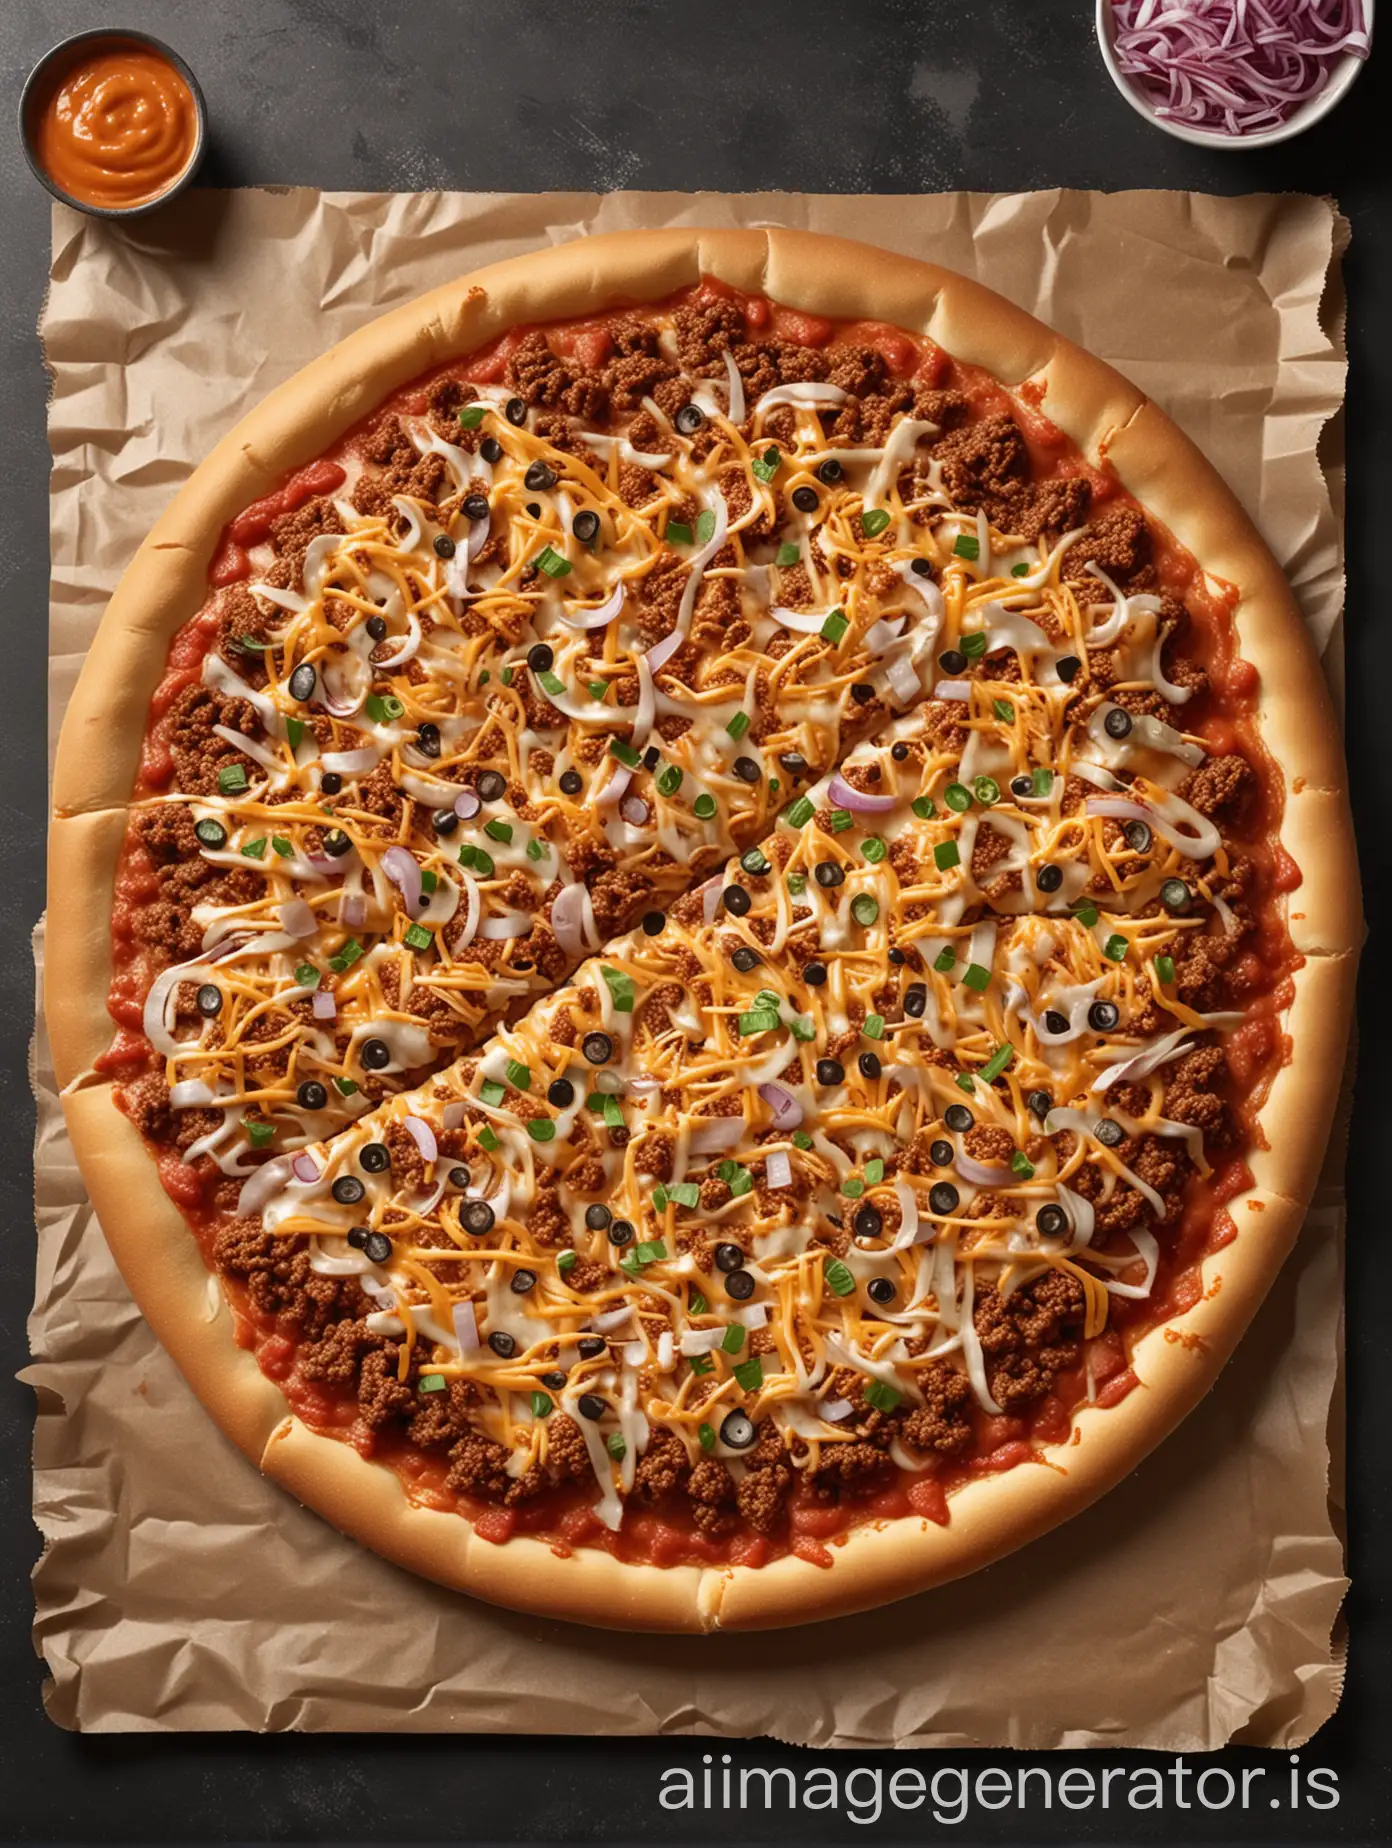 Create an marketing poster of a KFC Burger Pan Pizza which contains Base: Pizza Dough Toppings: Ground Beef, Chopped Tomatoes, Chopped Onions, Pickle Slices, Shredded Lettuce, and Shredded Cheddar Cheese Sauce: Light layer of kfc sauce is on bottom, and can choose any of the sauces available. 8k, realistic, professional photo for marketing